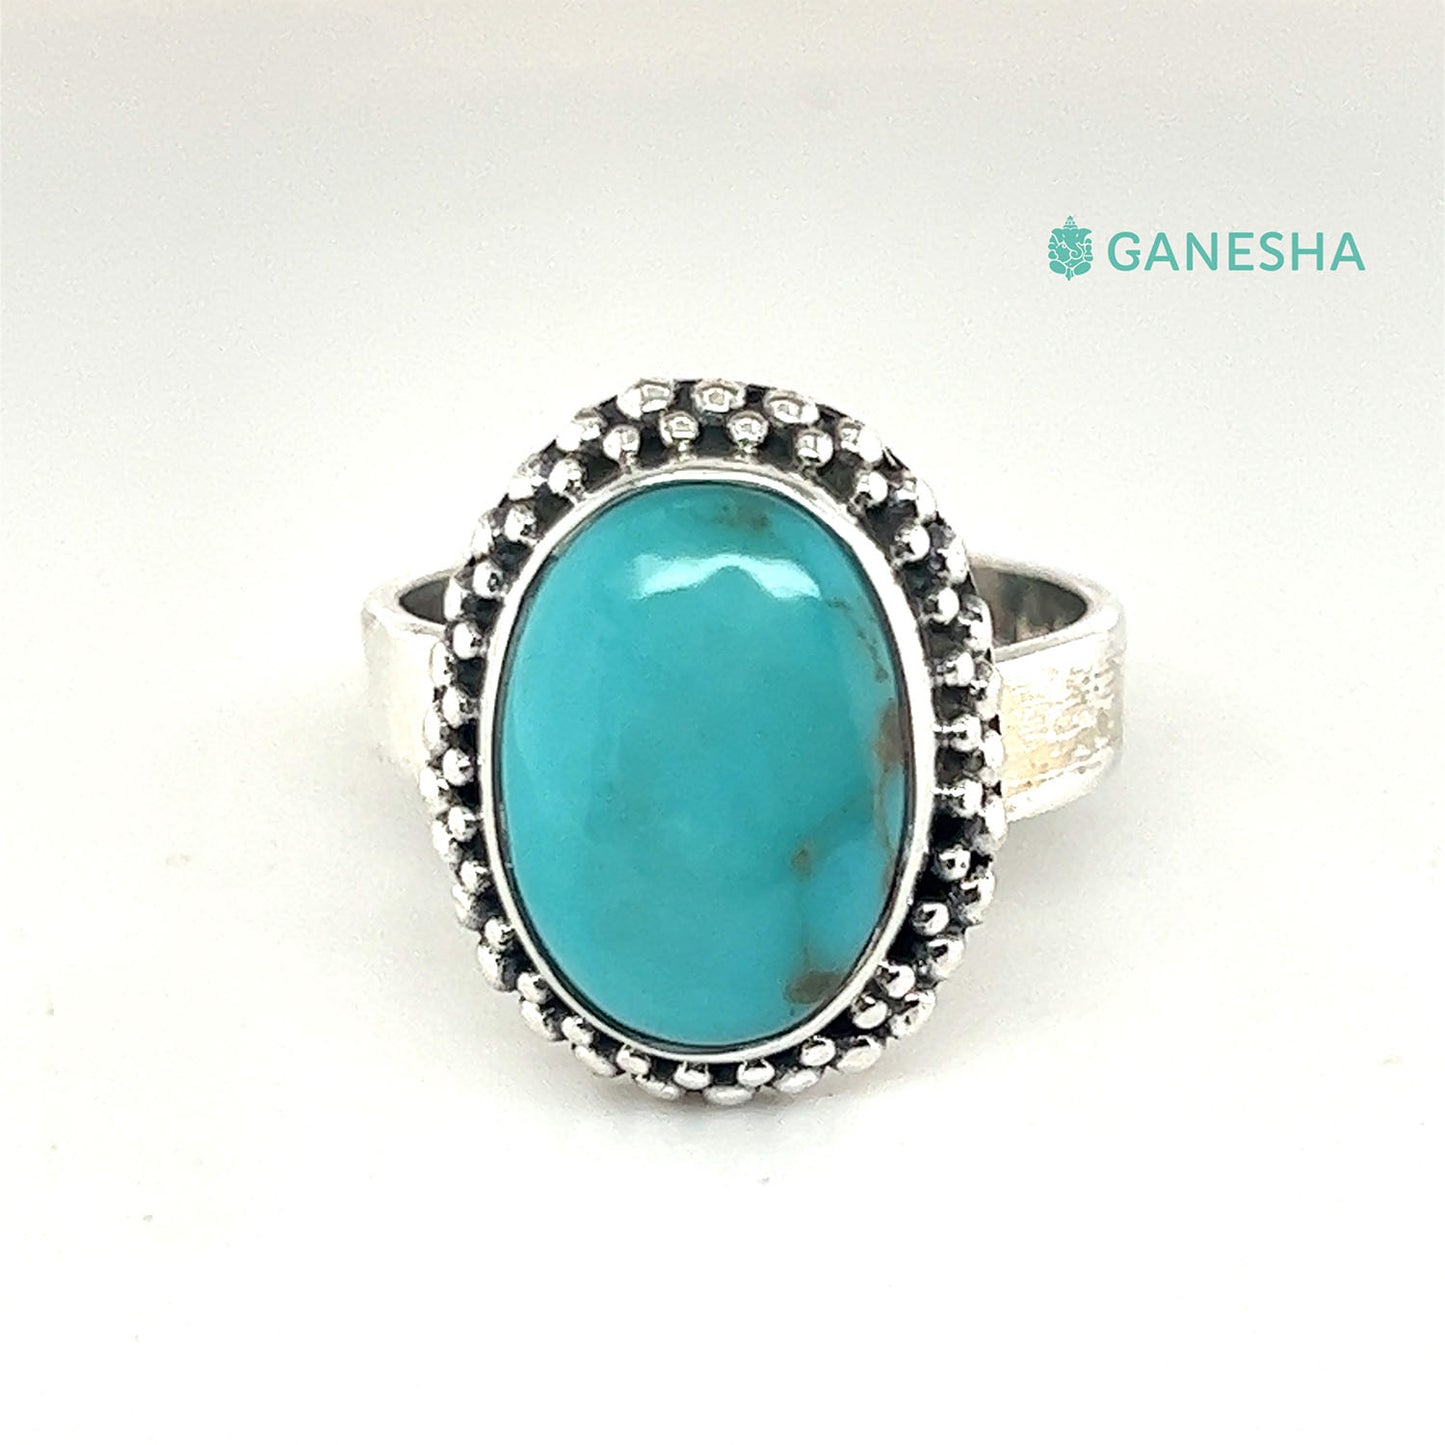 Ganesha - handigraft -Turquoise - Sterling-Silver-Jewellery-Gift-Set-With-free-Chain